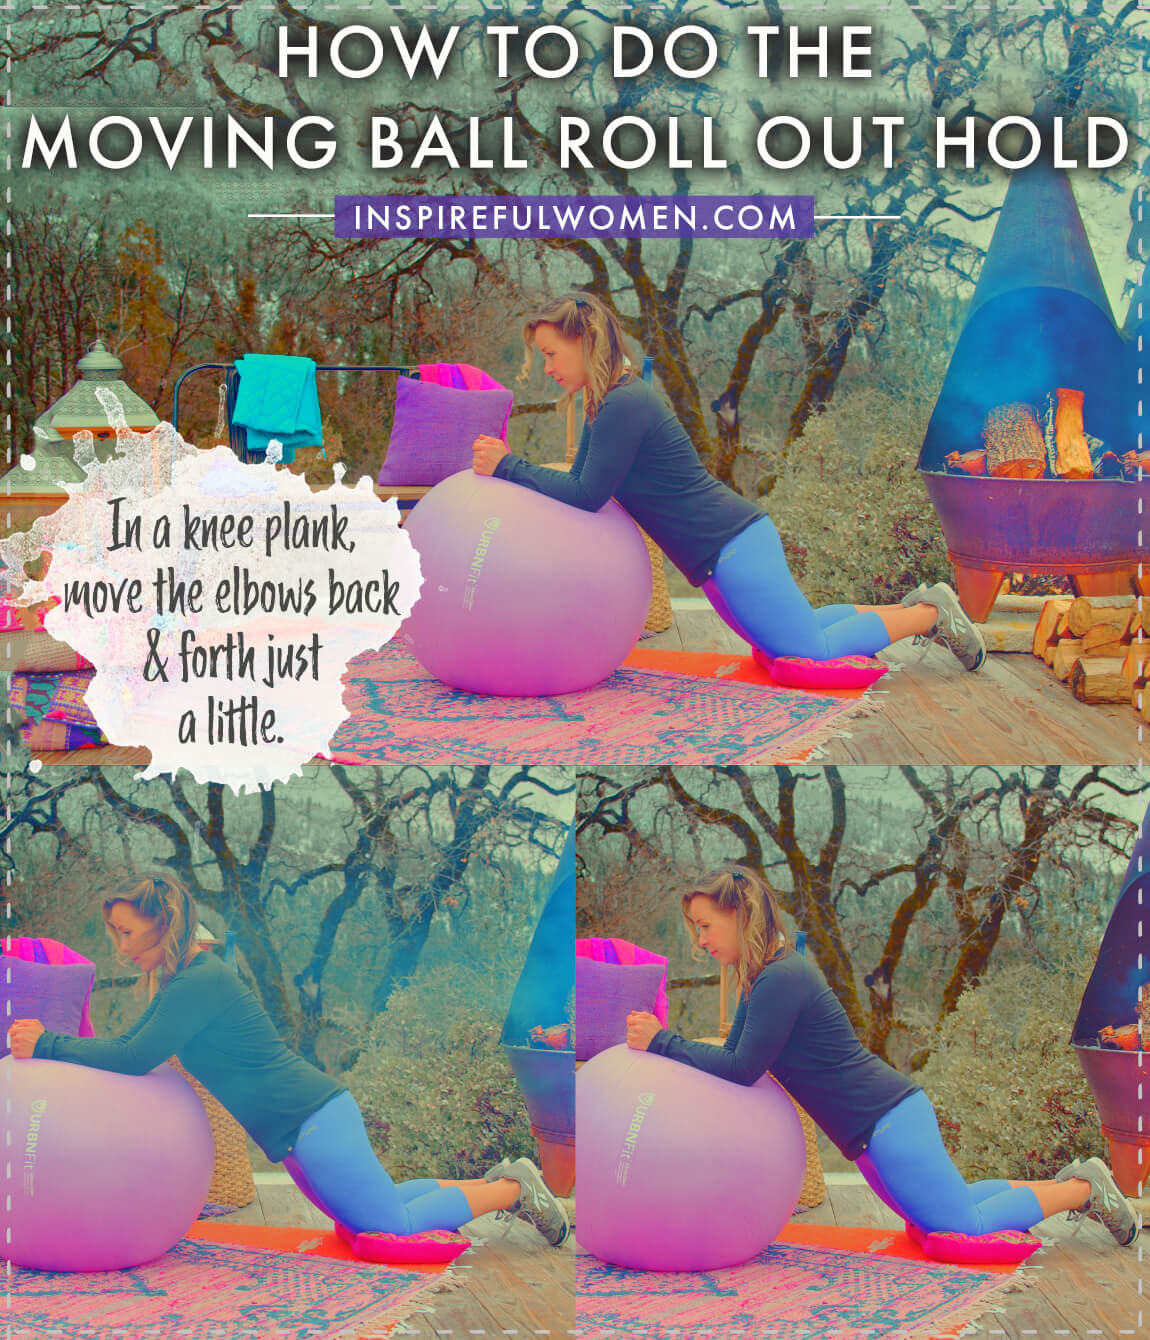 how-to-moving-swiss-ball-roll-out-buzz-saw-knee-plank-beginner-core-ab-exercise-proper-form